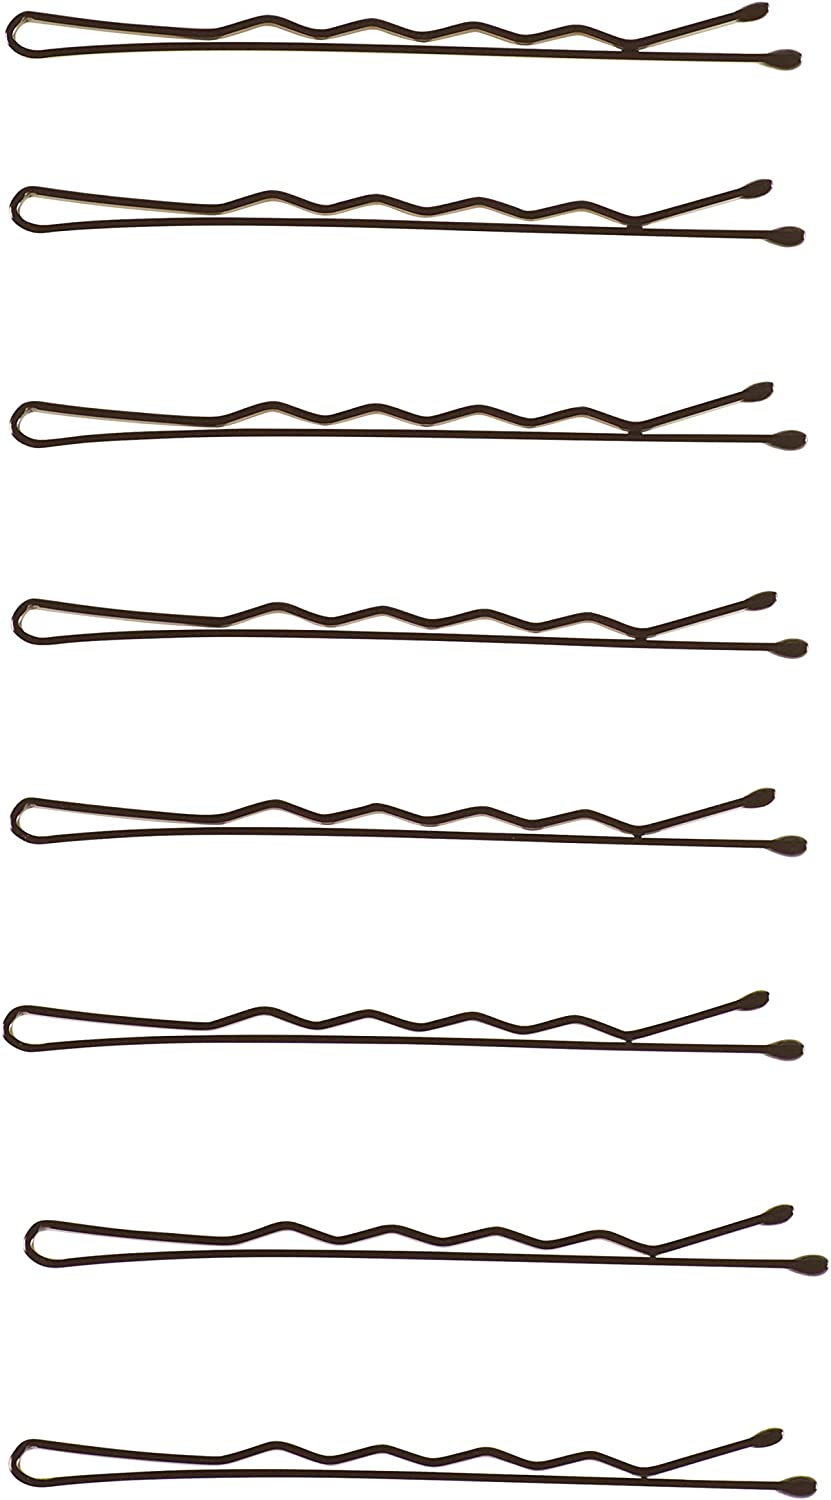 Goody Hair Bobby Pins - Black 60 piece Value Pack for Women